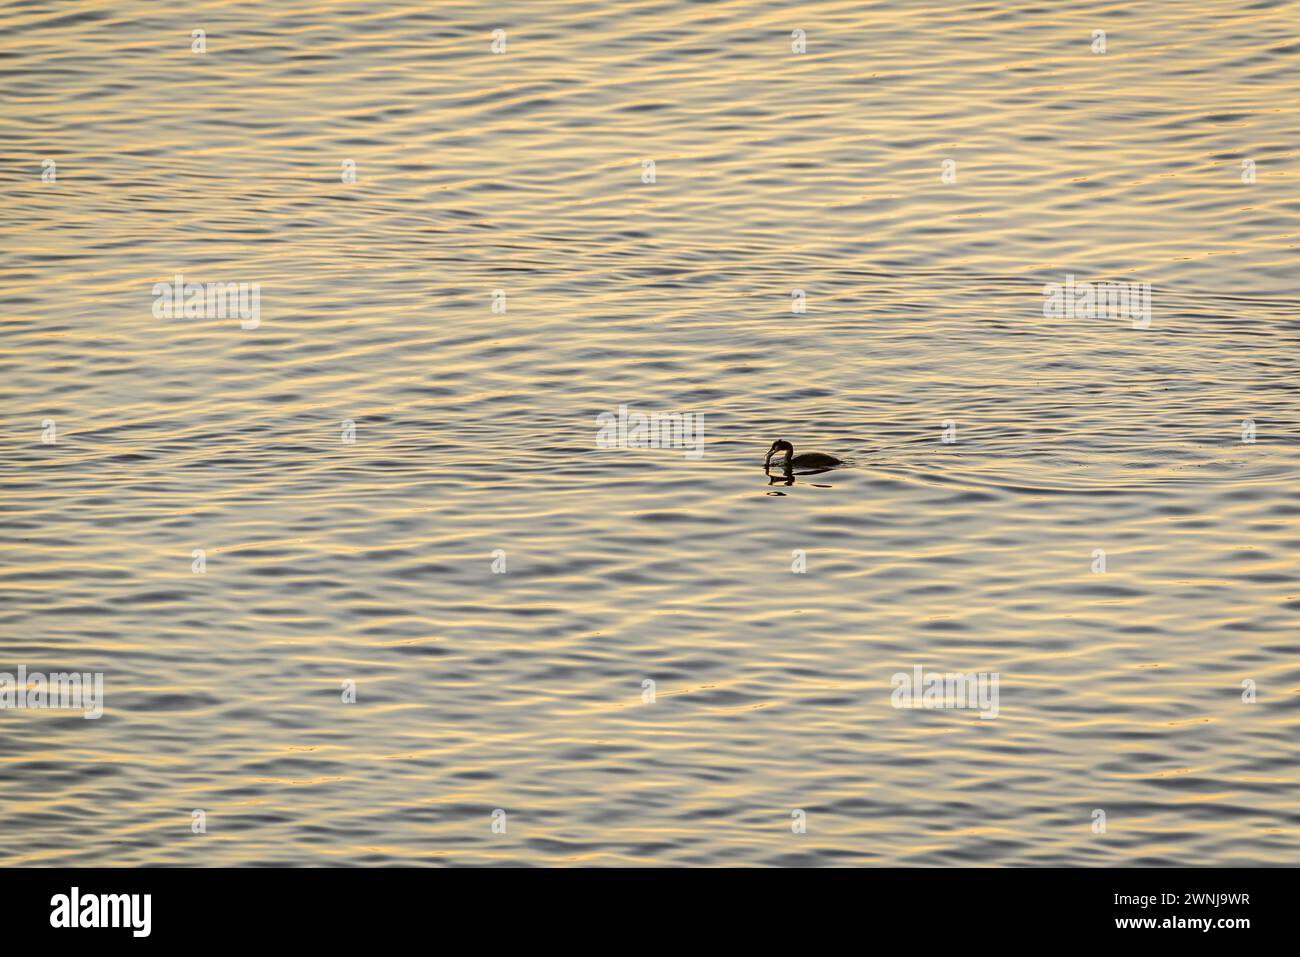 A cormorant at sunrise on the Ebro river seen from the Zigurat viewpoint, at the mouth of the Ebro River (Tarragona, Catalonia, Spain) Stock Photo